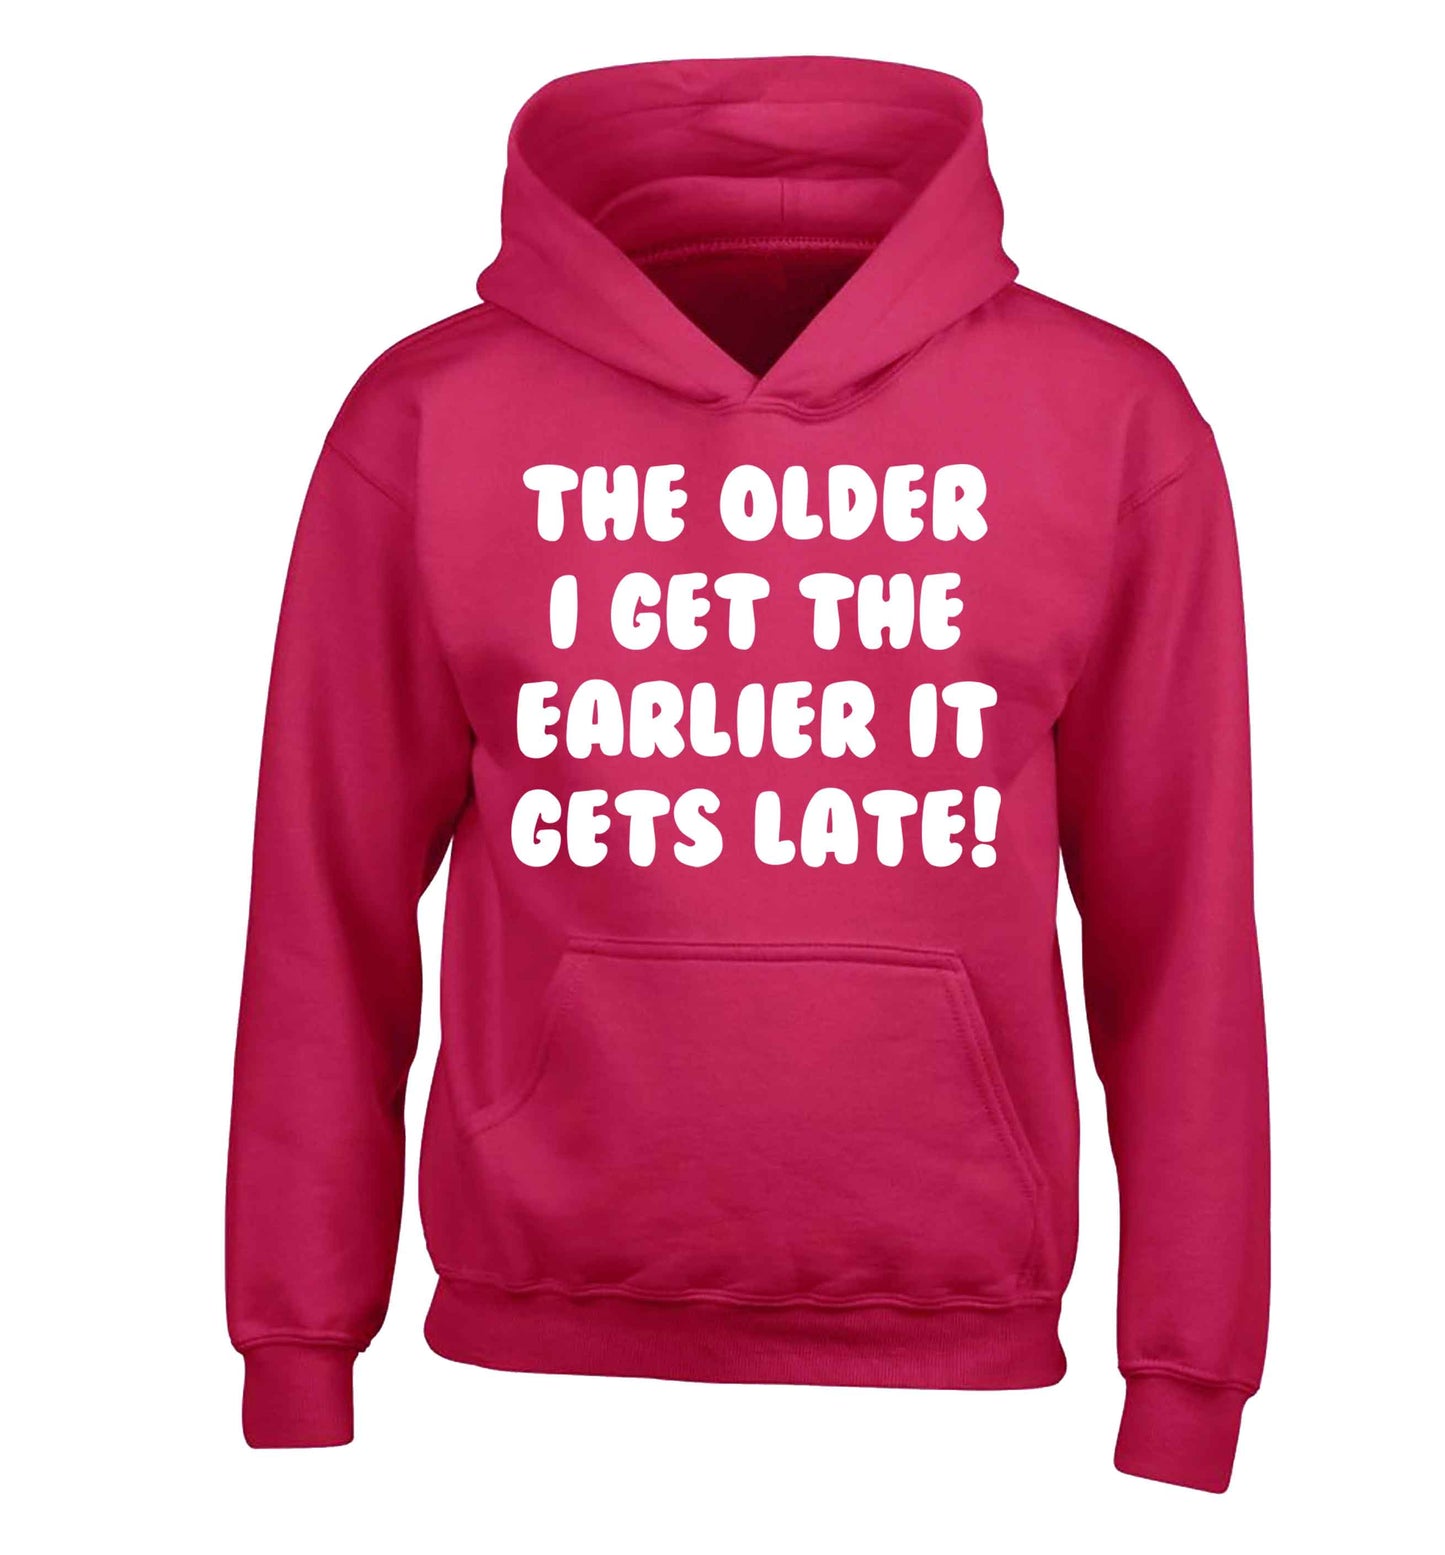 The older I get the earlier it gets late! children's pink hoodie 12-13 Years